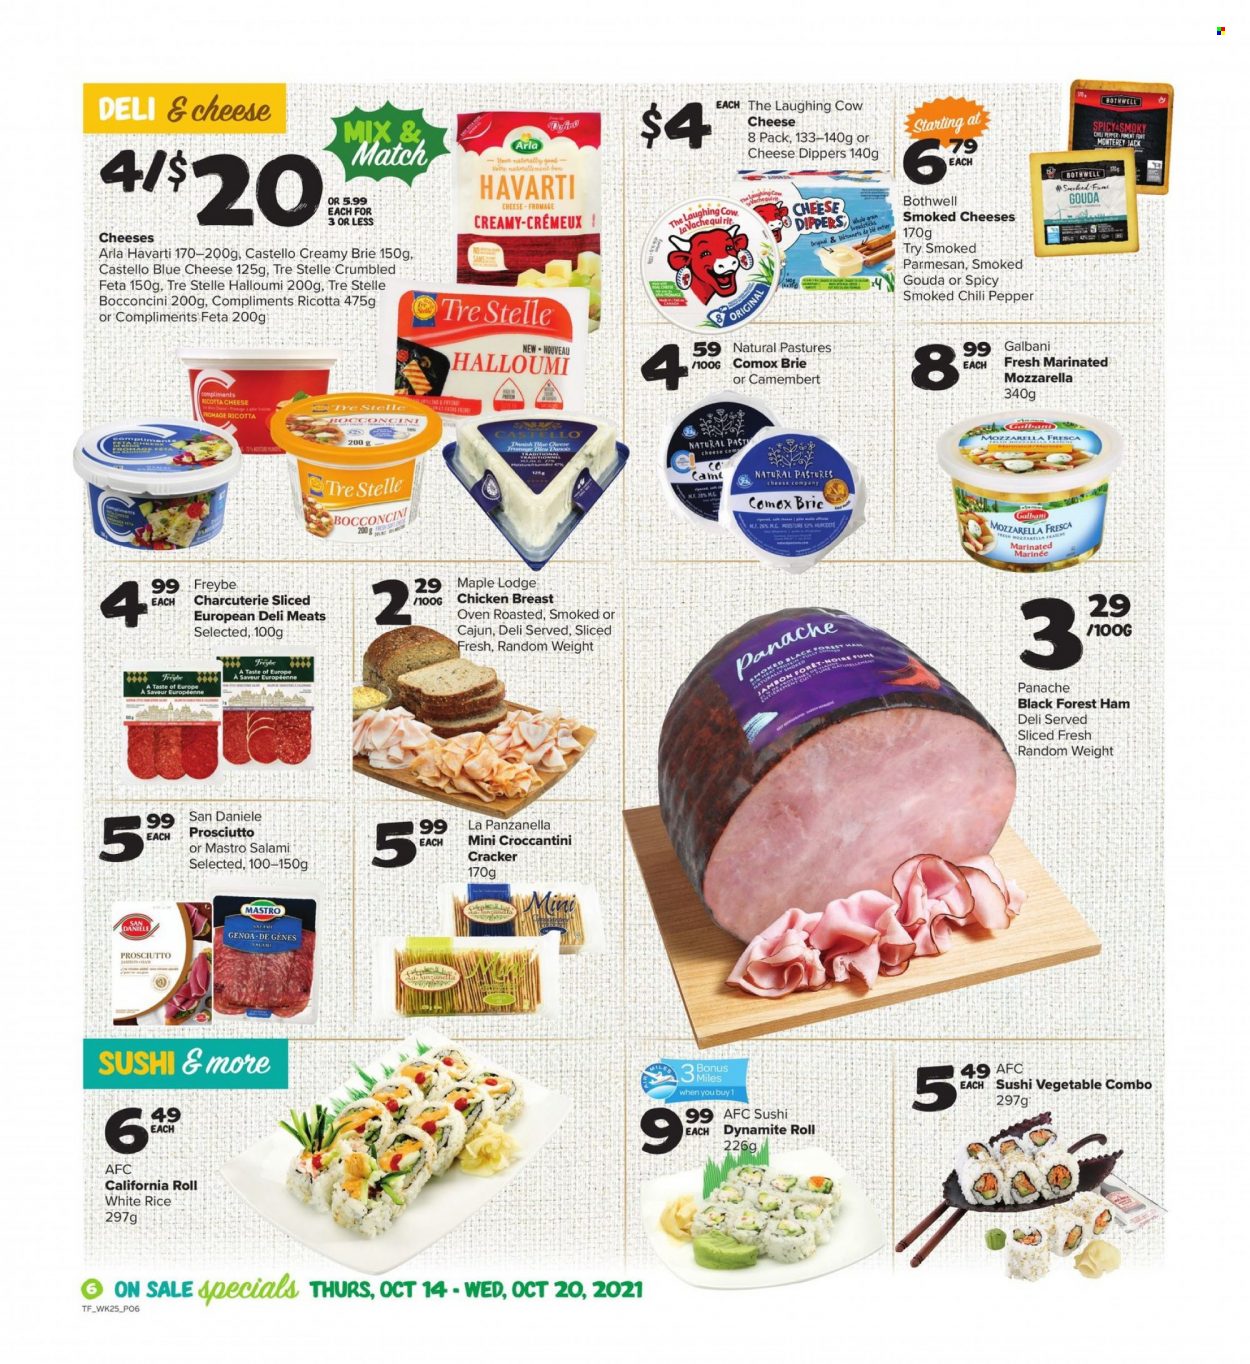 thumbnail - Thrifty Foods Flyer - October 14, 2021 - October 20, 2021 - Sales products - salami, ham, prosciutto, blue cheese, bocconcini, gouda, Monterey Jack cheese, halloumi, Havarti, parmesan, brie, The Laughing Cow, feta, Galbani, Arla, crackers, rice, white rice, pepper, fruit jam, chicken breasts, chicken, camembert, mozzarella, ricotta. Page 6.